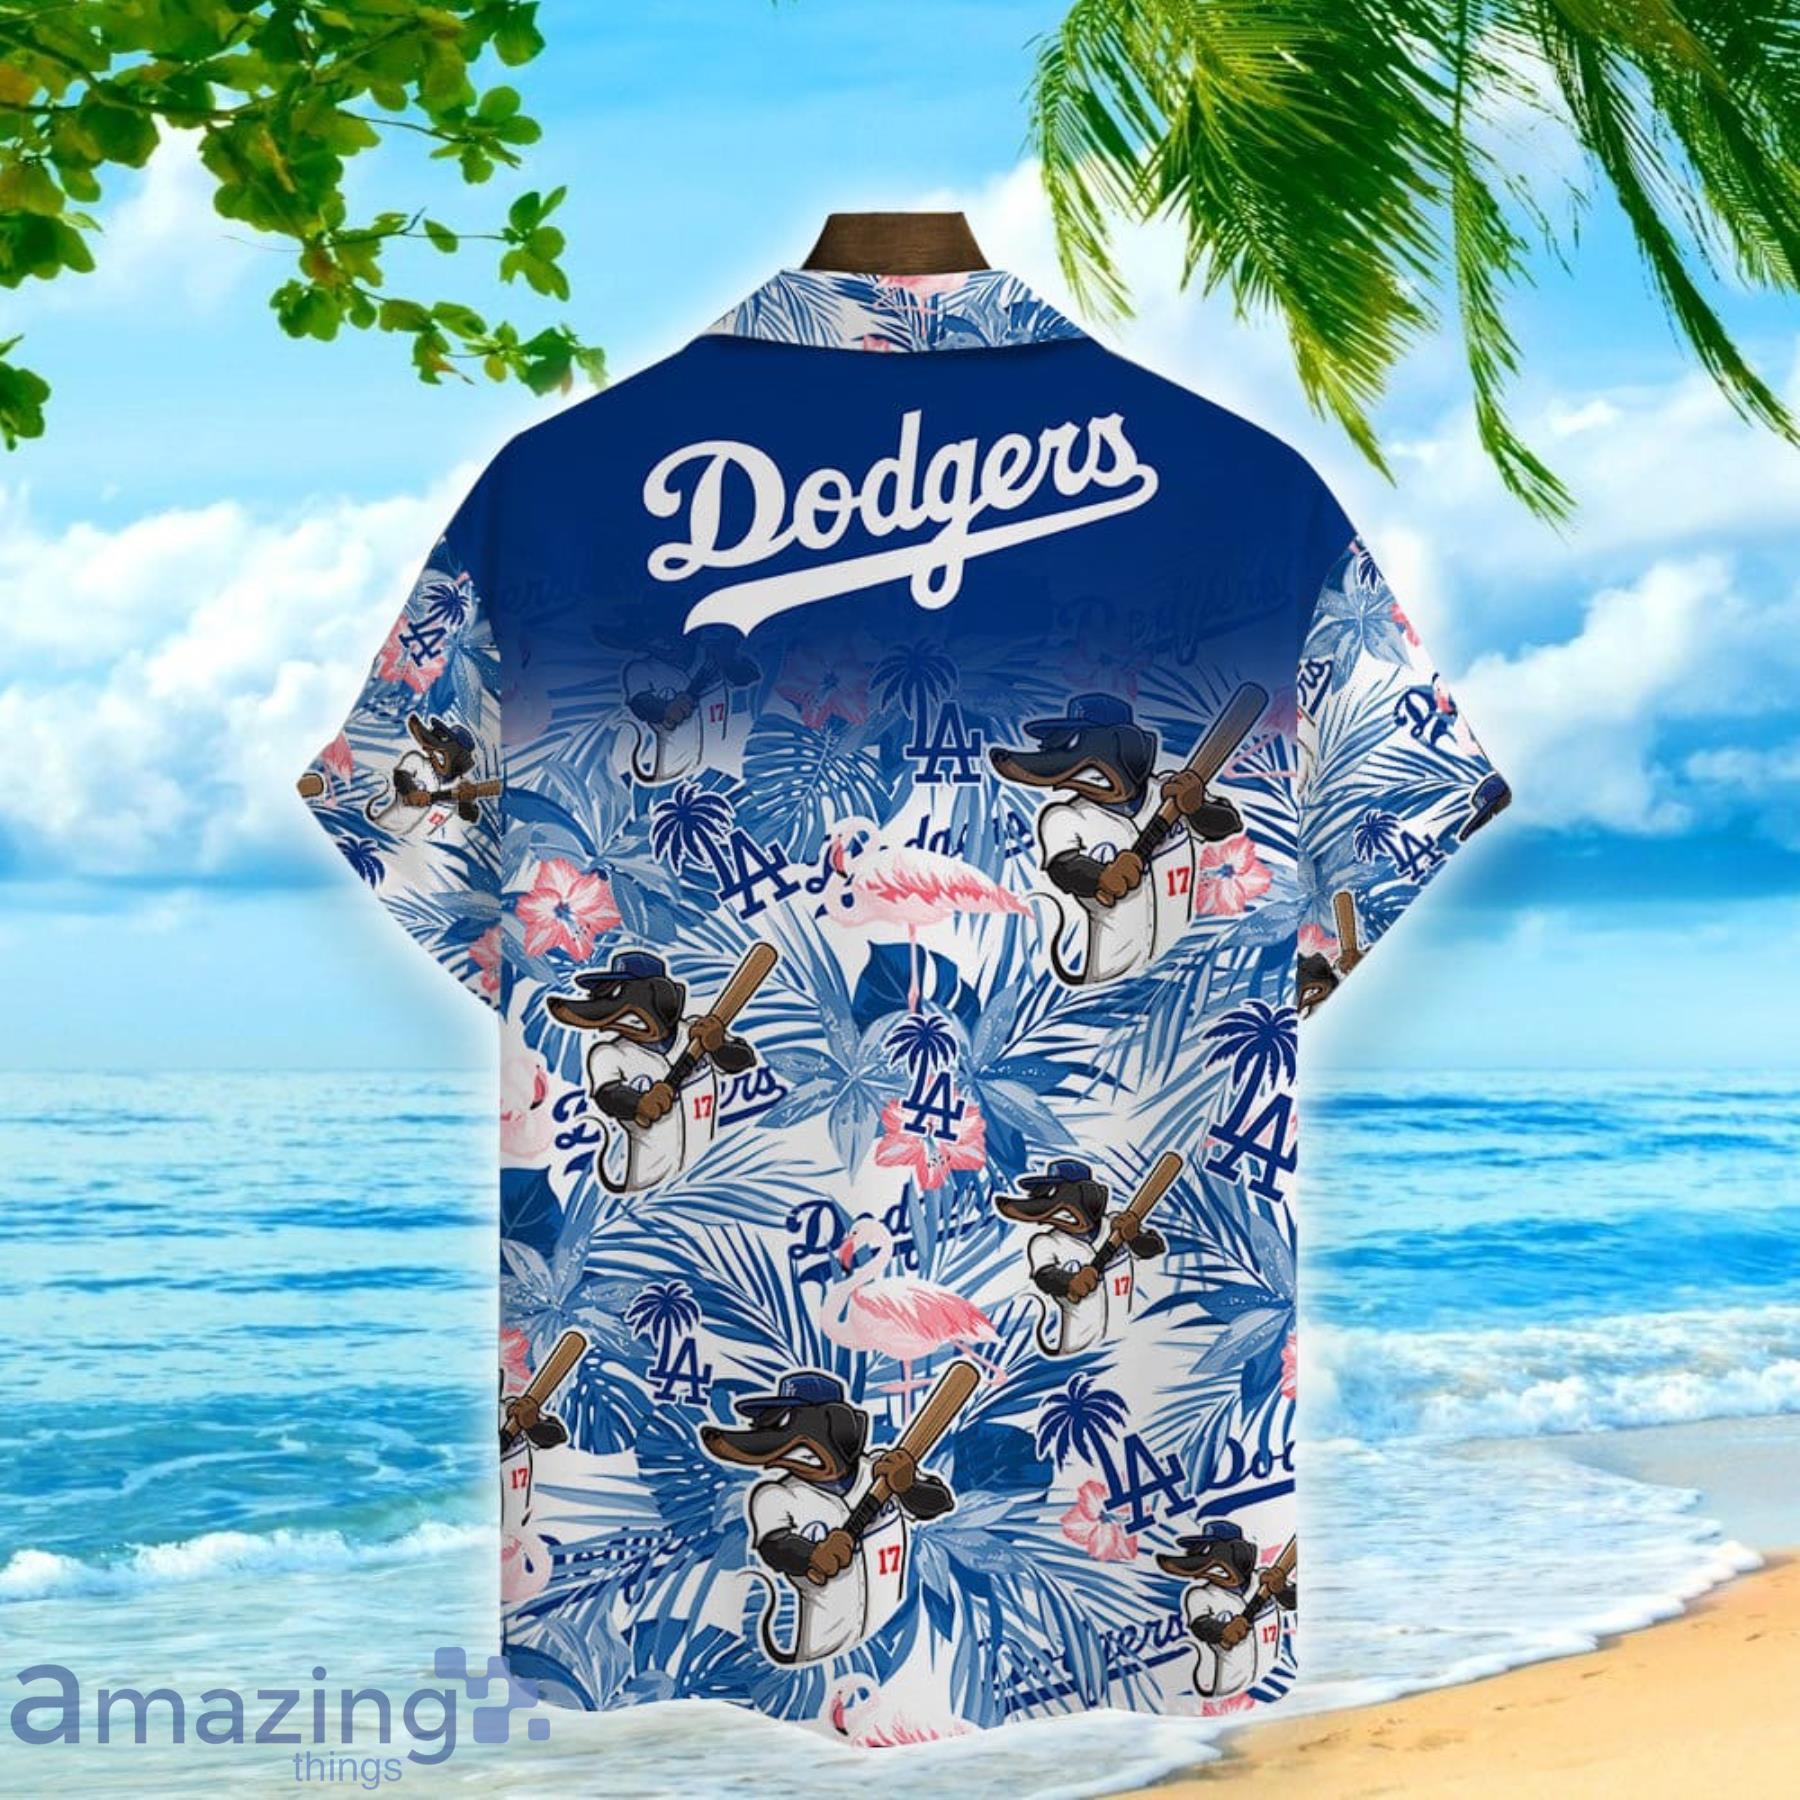 Personalized Los Angeles Dodgers Mascot All Over Print 3D Baseball